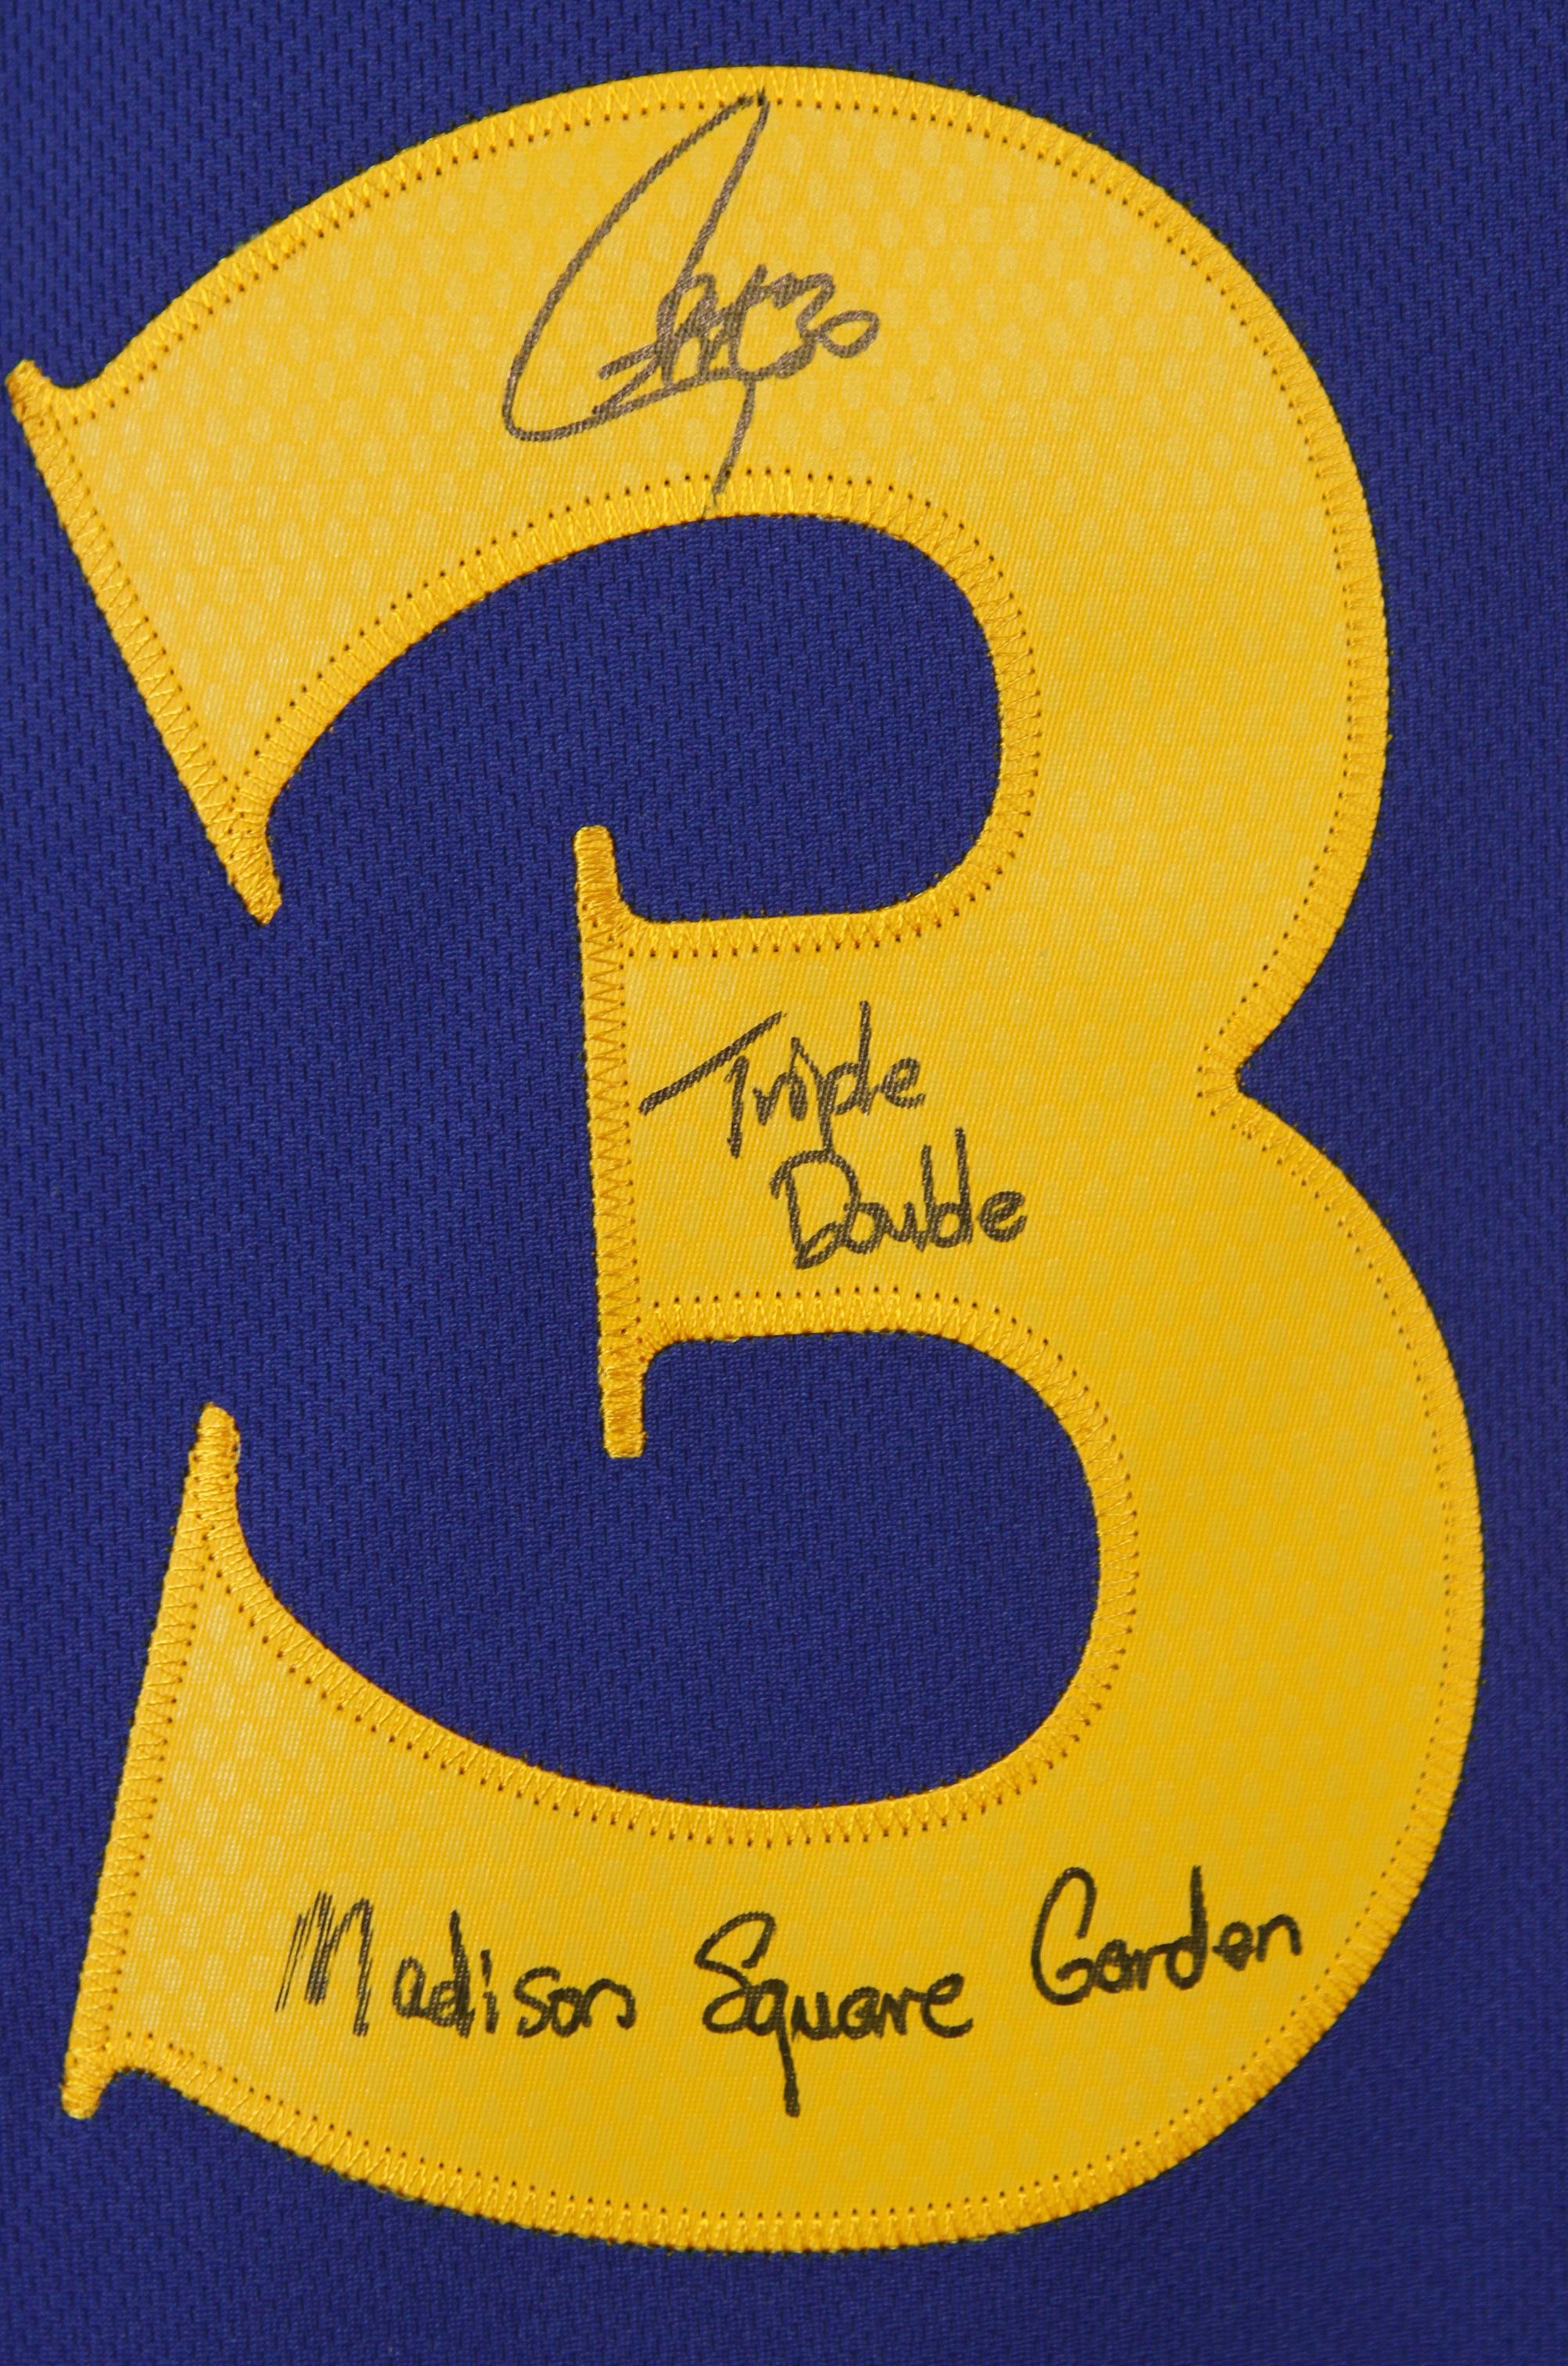 steph curry autographed jersey